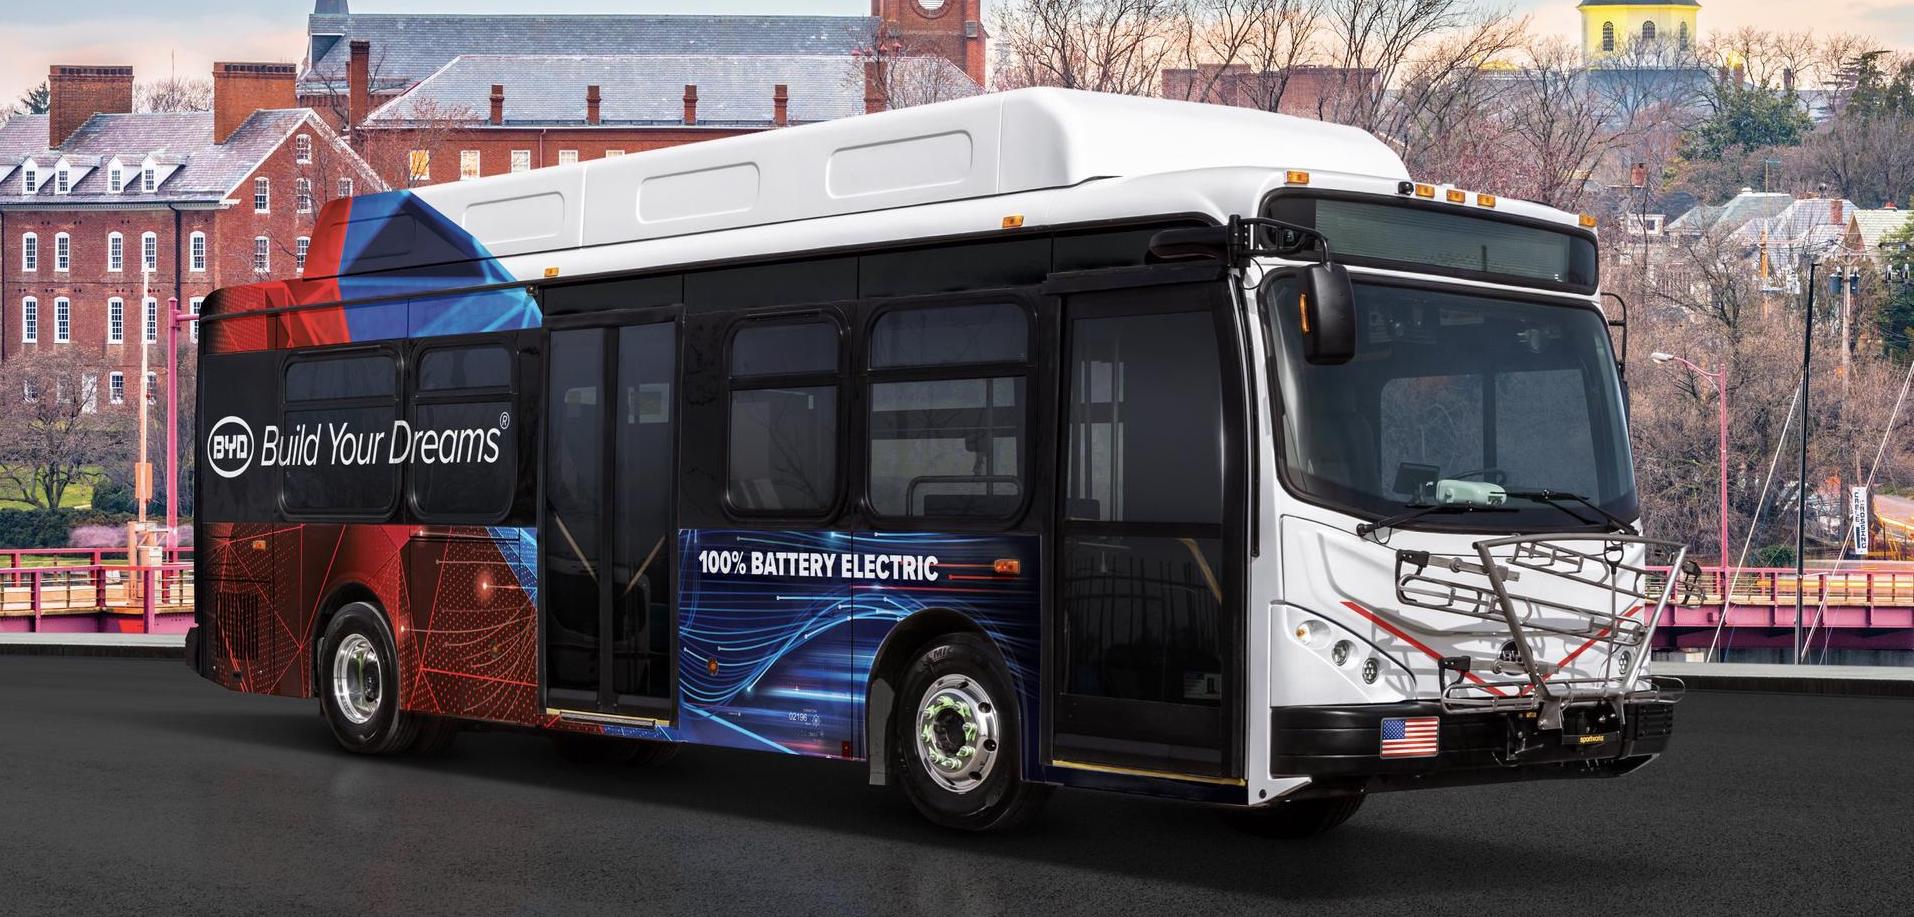 Annapolis Transit Electrifies Their Fleet with Purchase of Two BYD K7M Buses